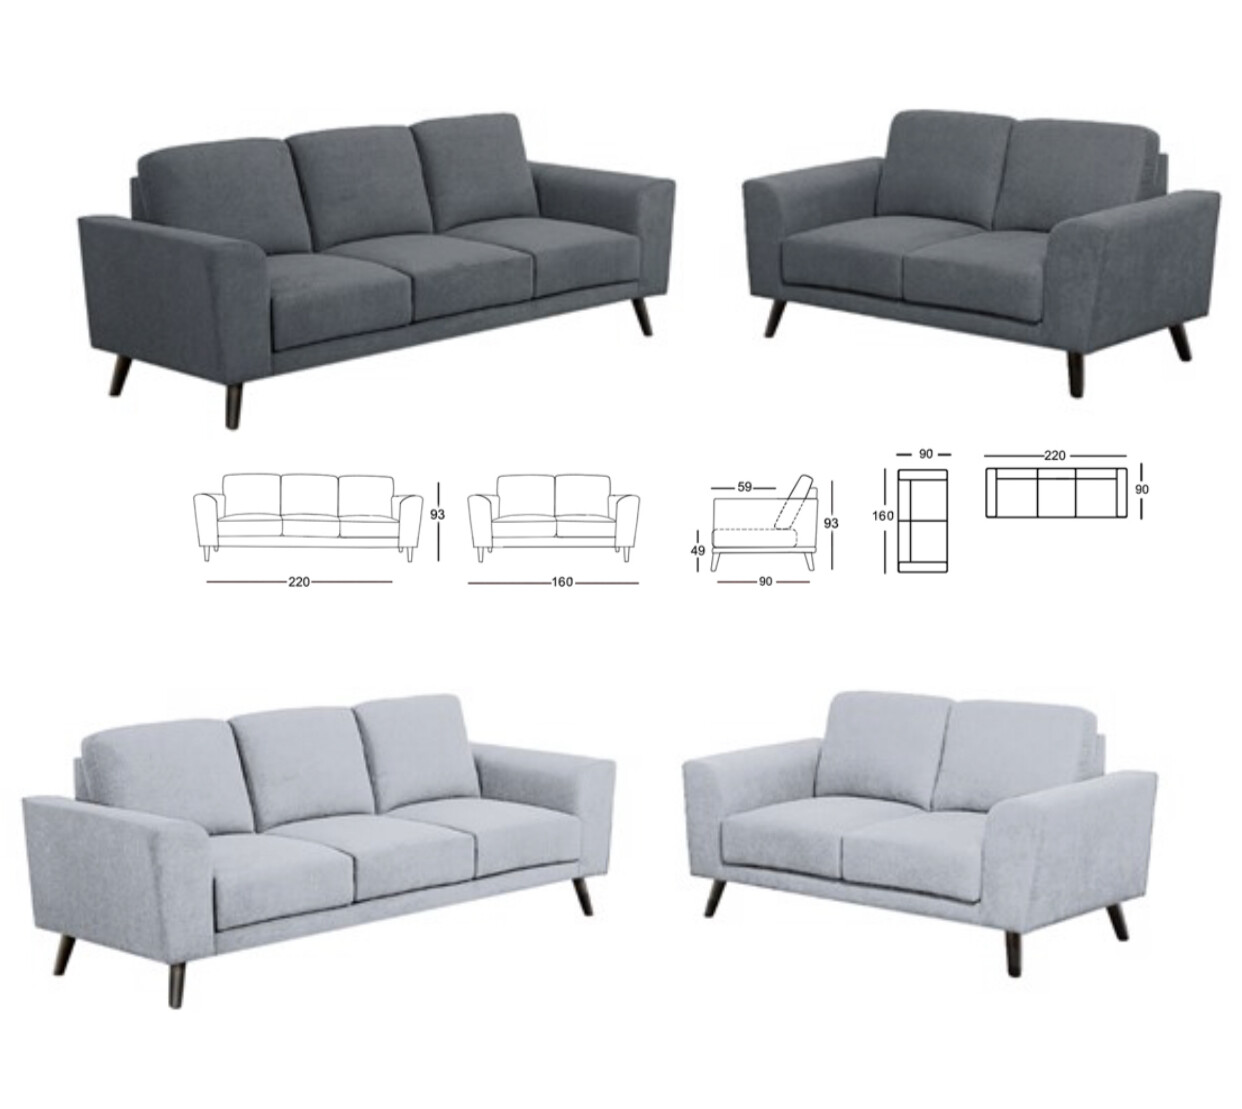 Fabric 3 seater +2 seater